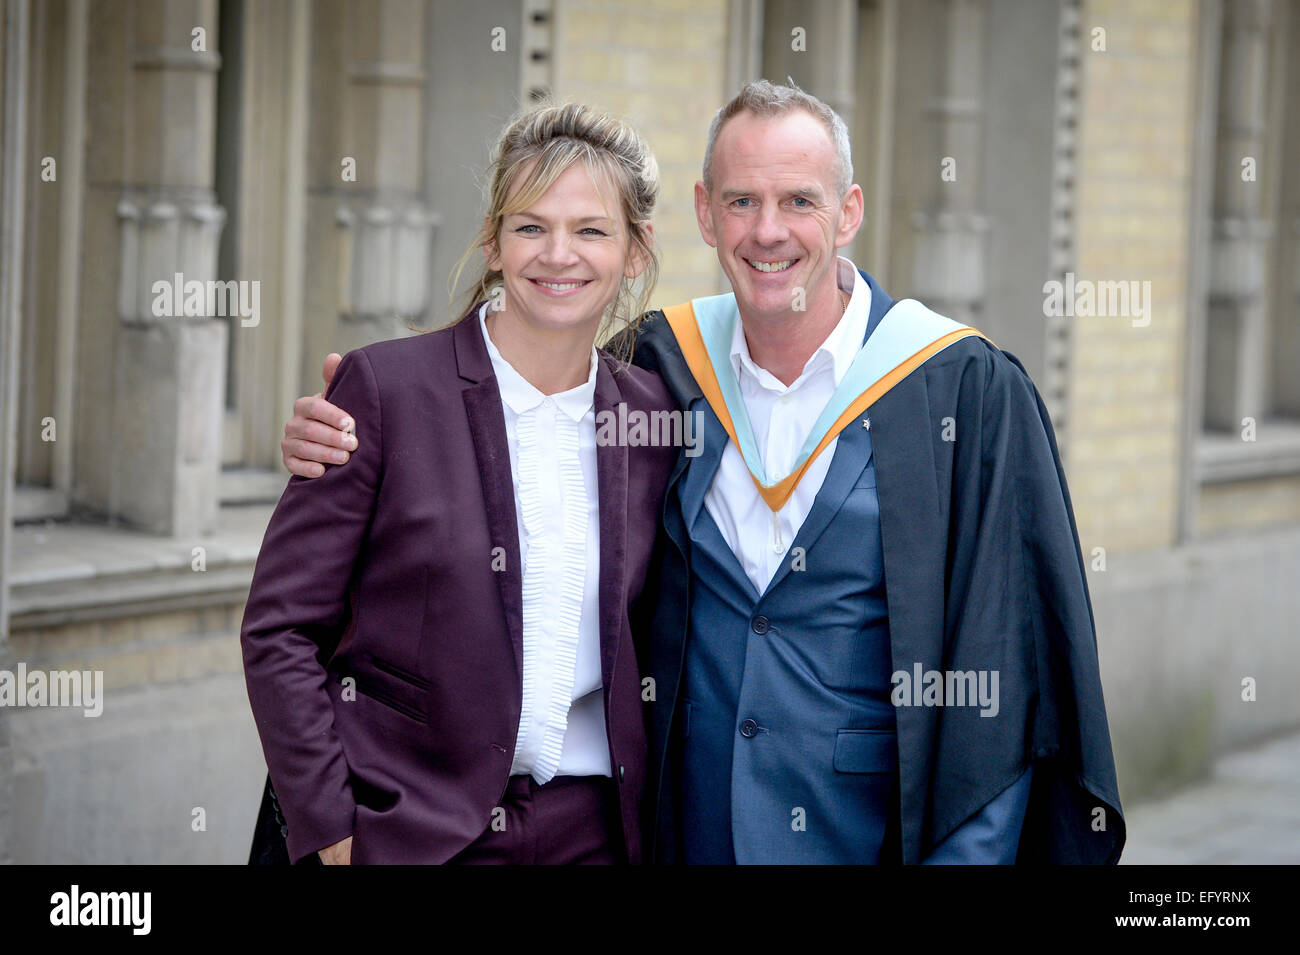 Brighton, UK. 12th Feb, 2015. Norman Cook aka Fatboy Slim with his wife Zoe Ball in Brighton East Sussex today. Norman was presented with Alumnus Award 2015 by the University of Brighton during the winter graduation ceremony. Credit:  Jim Holden/Alamy Live News Stock Photo